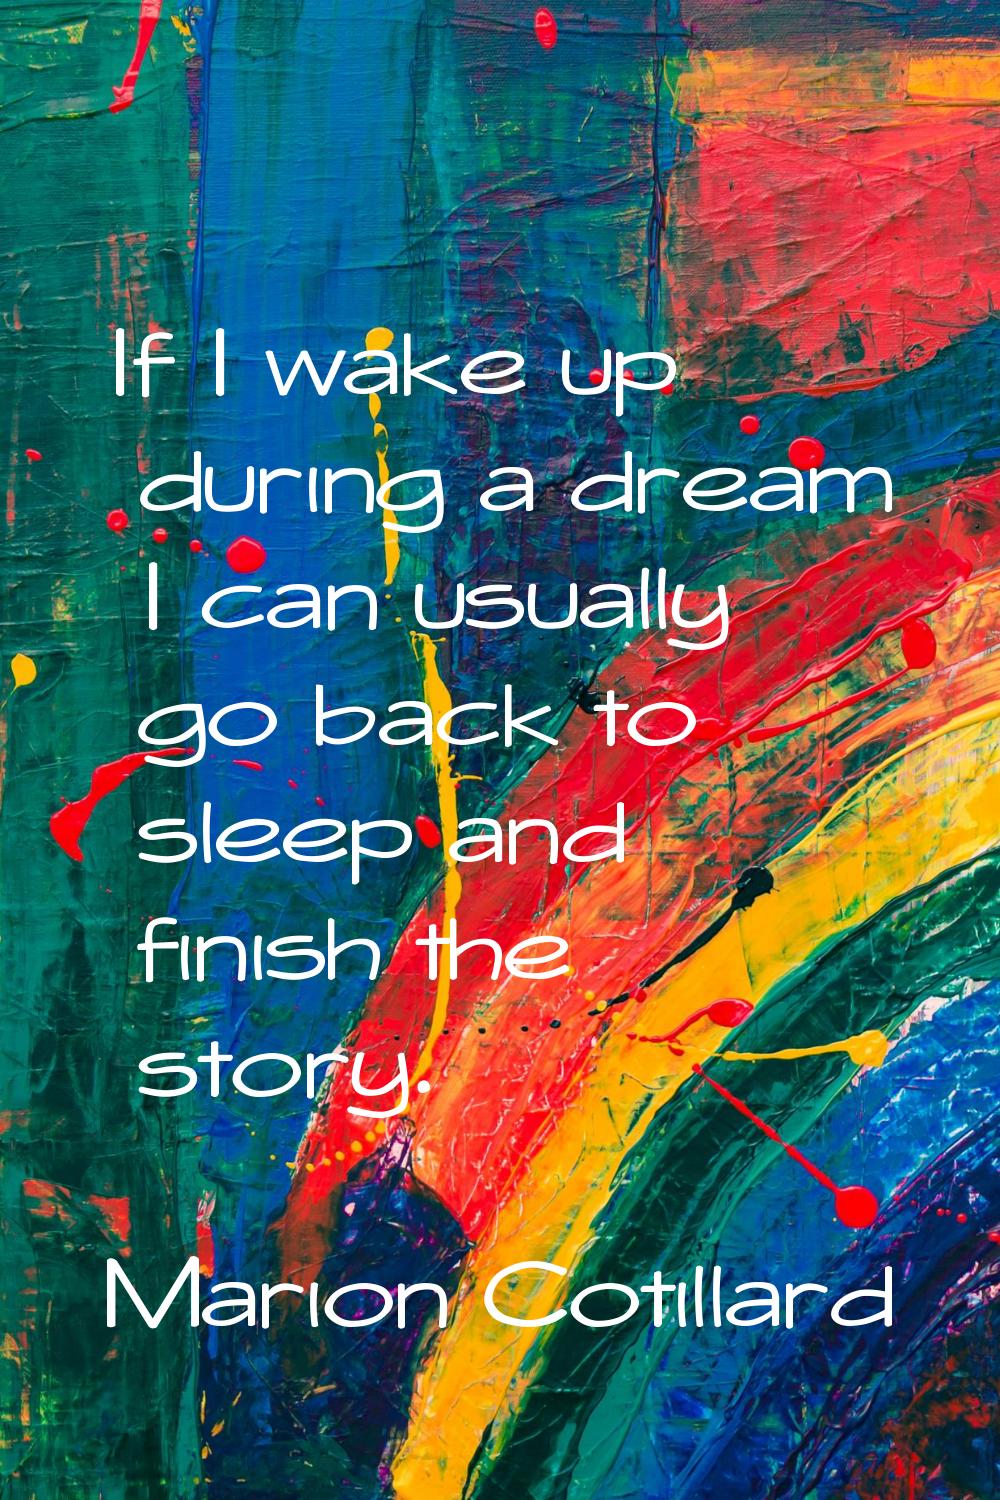 If I wake up during a dream I can usually go back to sleep and finish the story.